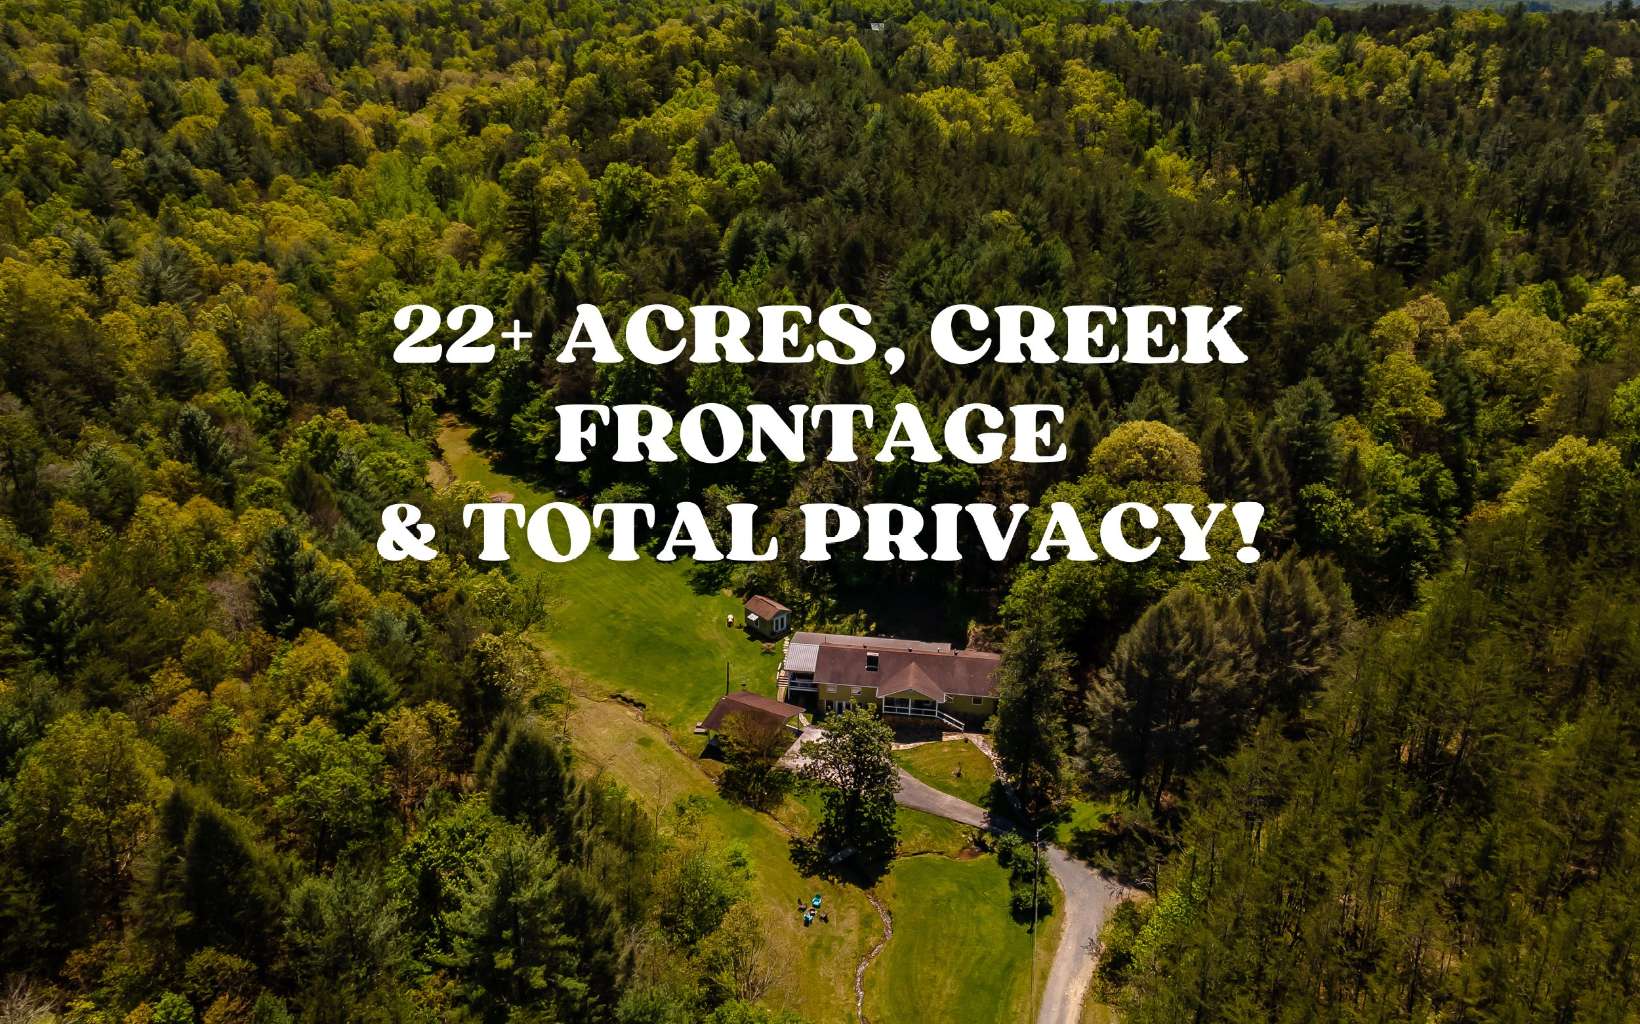 Calling ALL Developers! 22+ acres with mountain views, pasture, creek frontage AND you can boast In-town-living conveniences but total privacy! Wonderfully usable land w/ a year round creek meandering through the middle. Take the logging road up to the top of the mountain where you will find numerous building sites and mountain views. Or, just settle in at this totally private, one level, renovated ranch home w/ a kitchen that dinner party dreams are made of. Butlers pantry, massive Quartz island, spacious dining, upgraded appliances incl. gas range and add'l wall oven. Wonderful primary suite w/ an abundance of storage/closet space & a spa-like bath. Private outdoor shower & outdoor living space over looking the pristine property. Don’t miss the artist studio w/ heat/air, the party cave & ample basement storage/workshop. Totally private oasis only 10 min from downtown Blue Ridge!